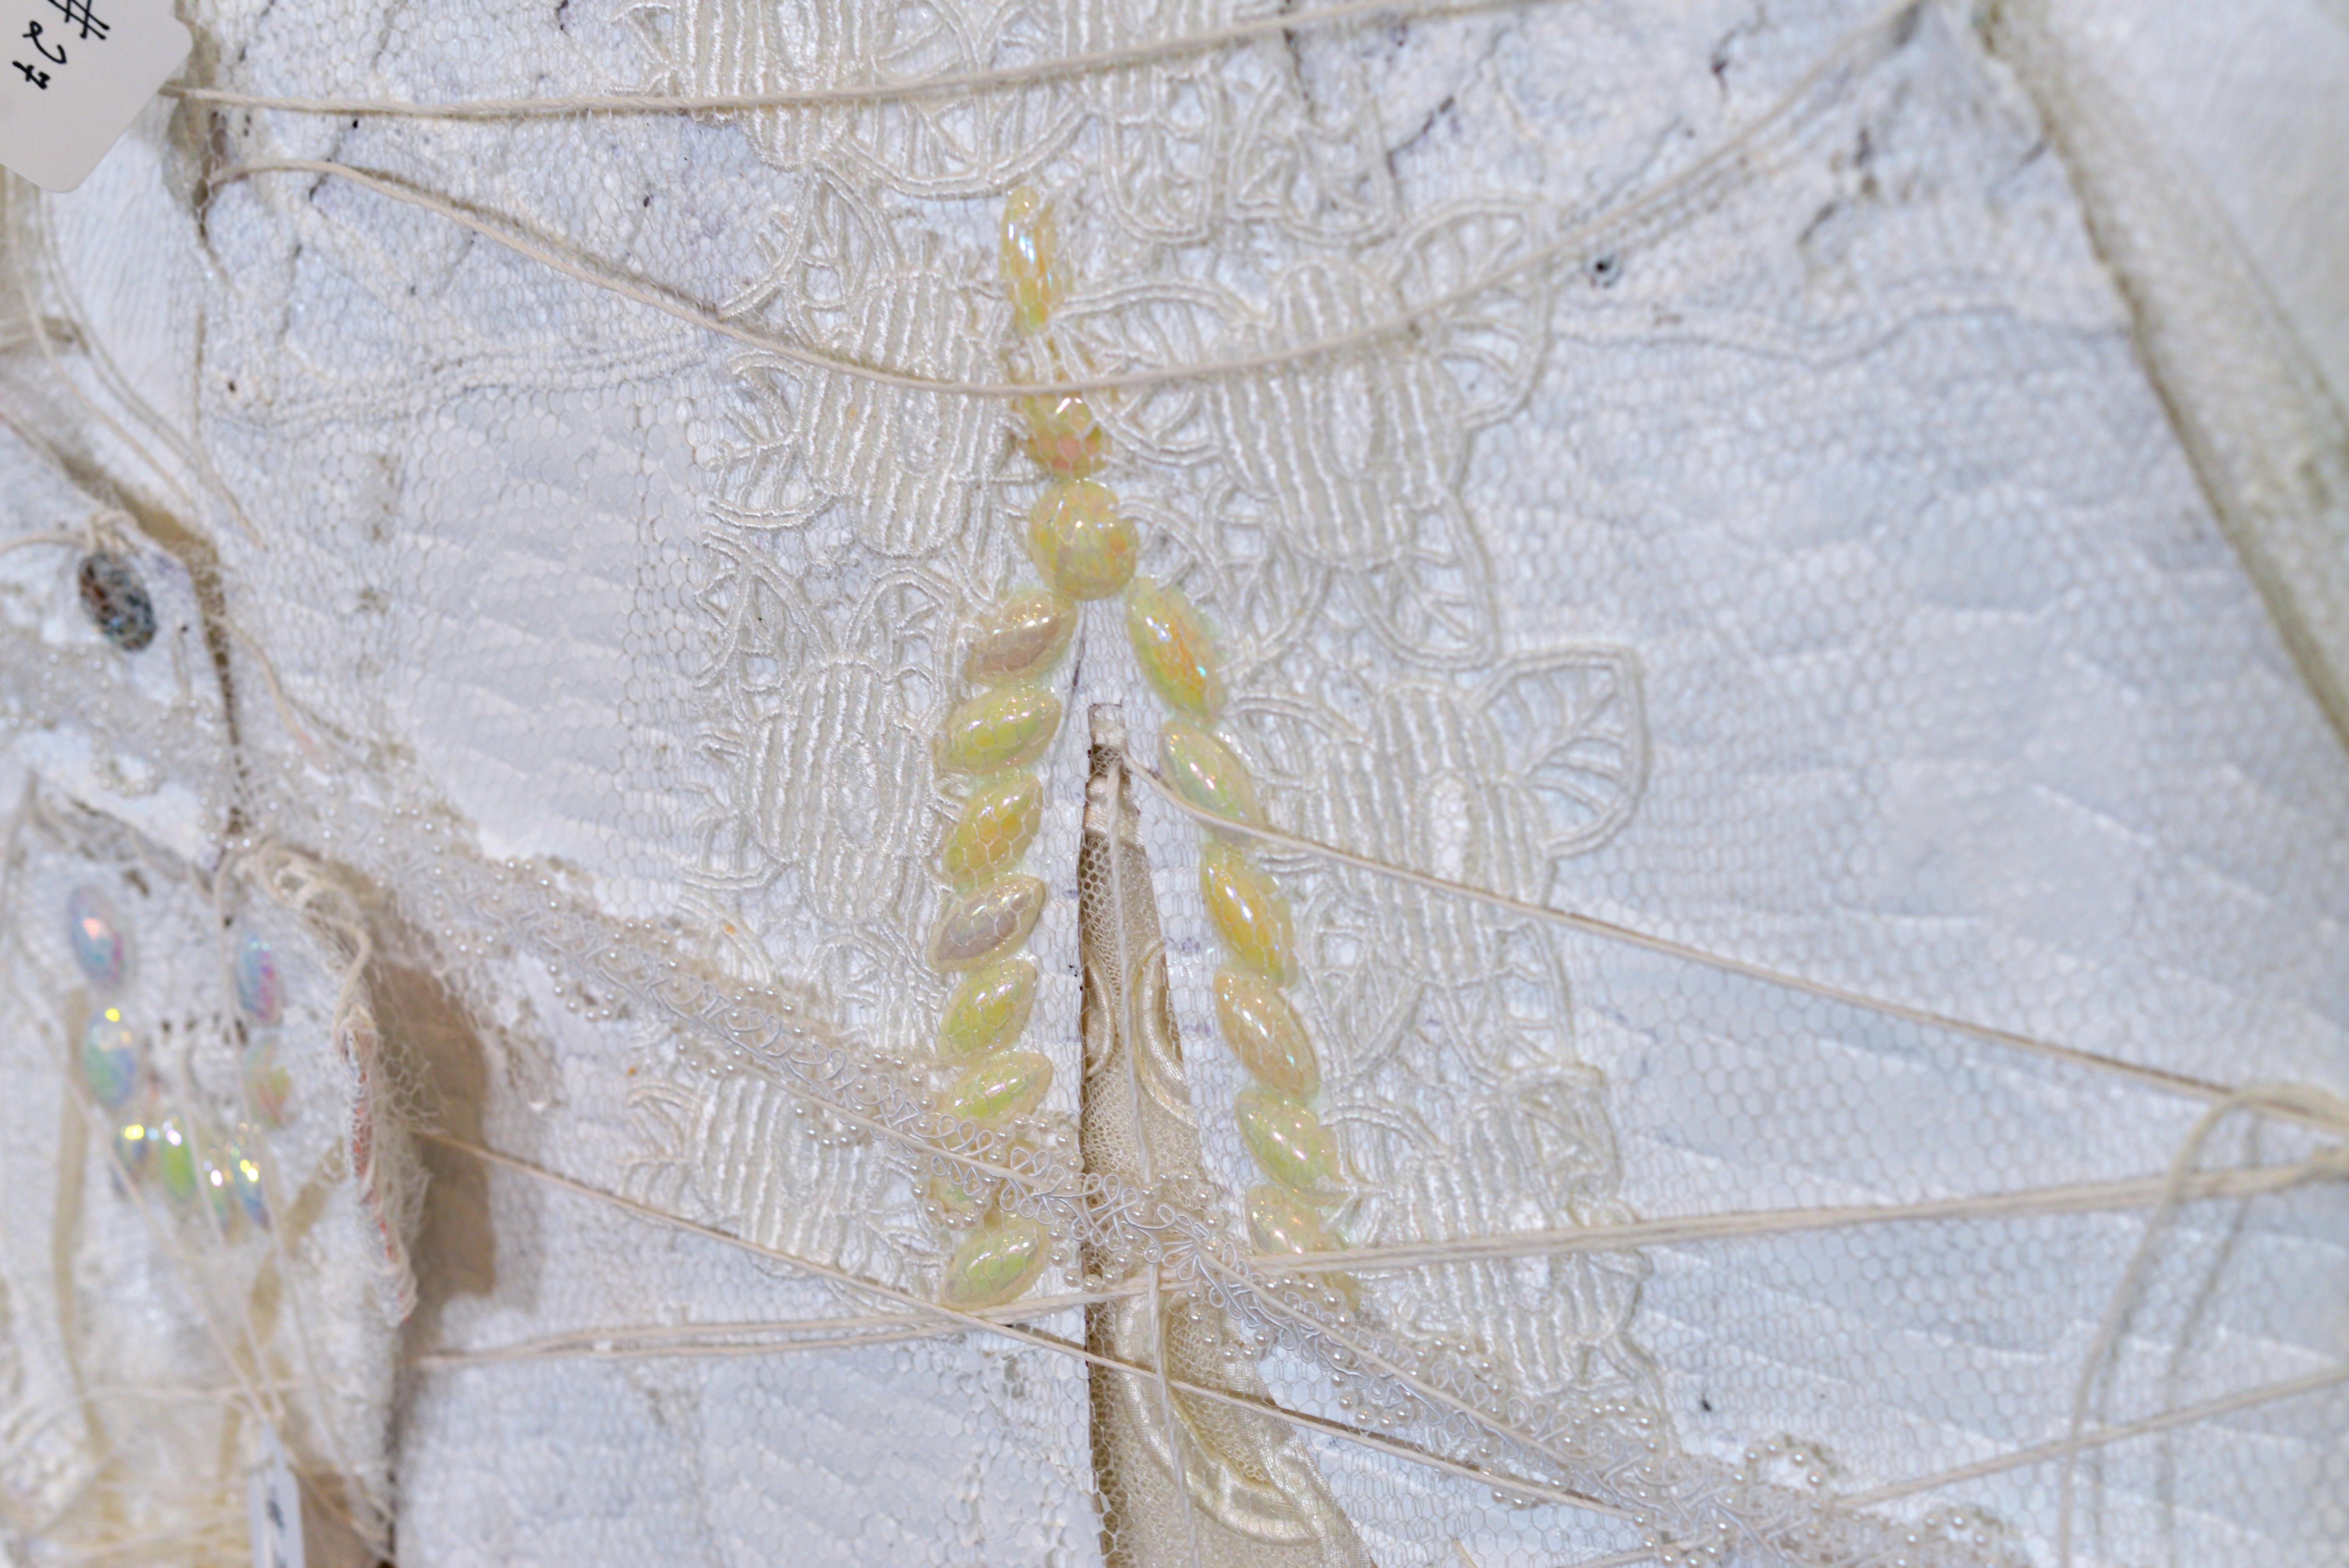 Remnants 4, Large white dress with 17 small dresses sewn on - Contemporary Mixed Media Art by Andrée Carter